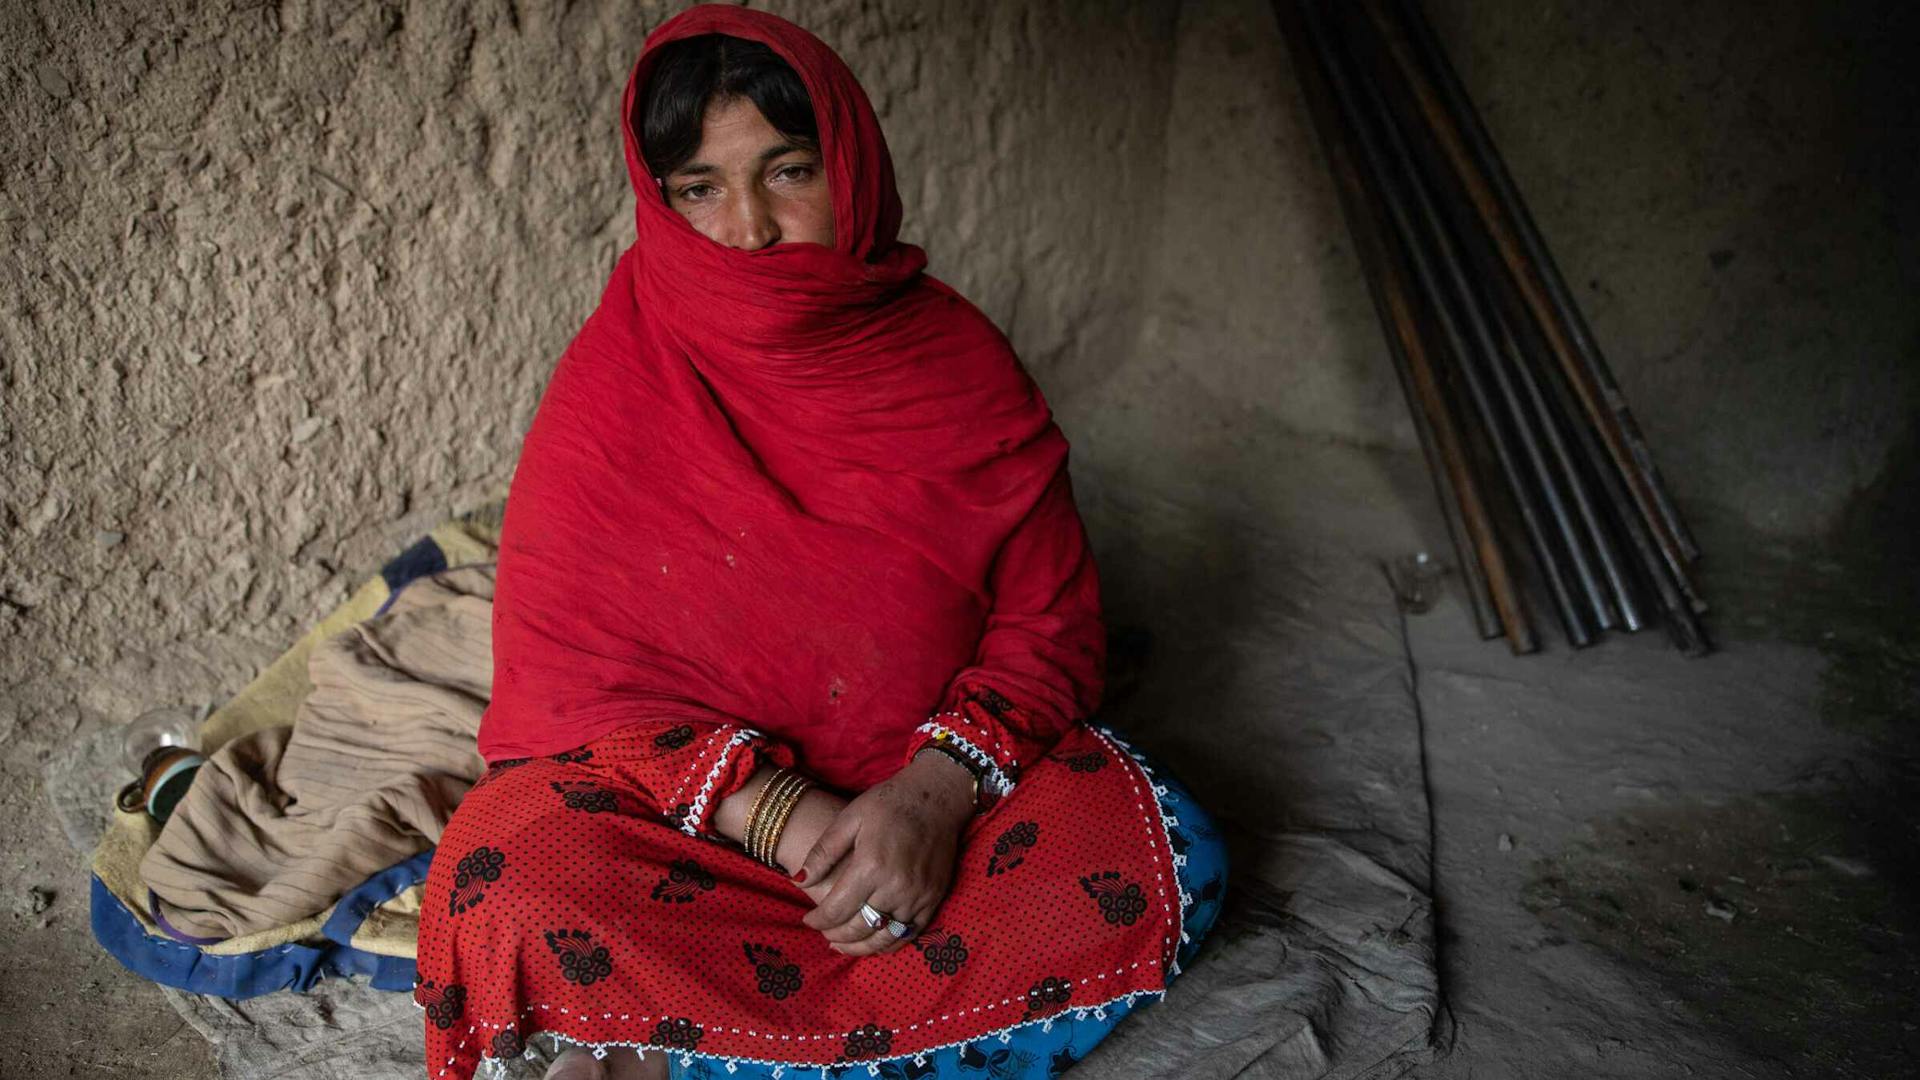 A young woman covered in a red veil sits on a blanky in a dim dirt hut.